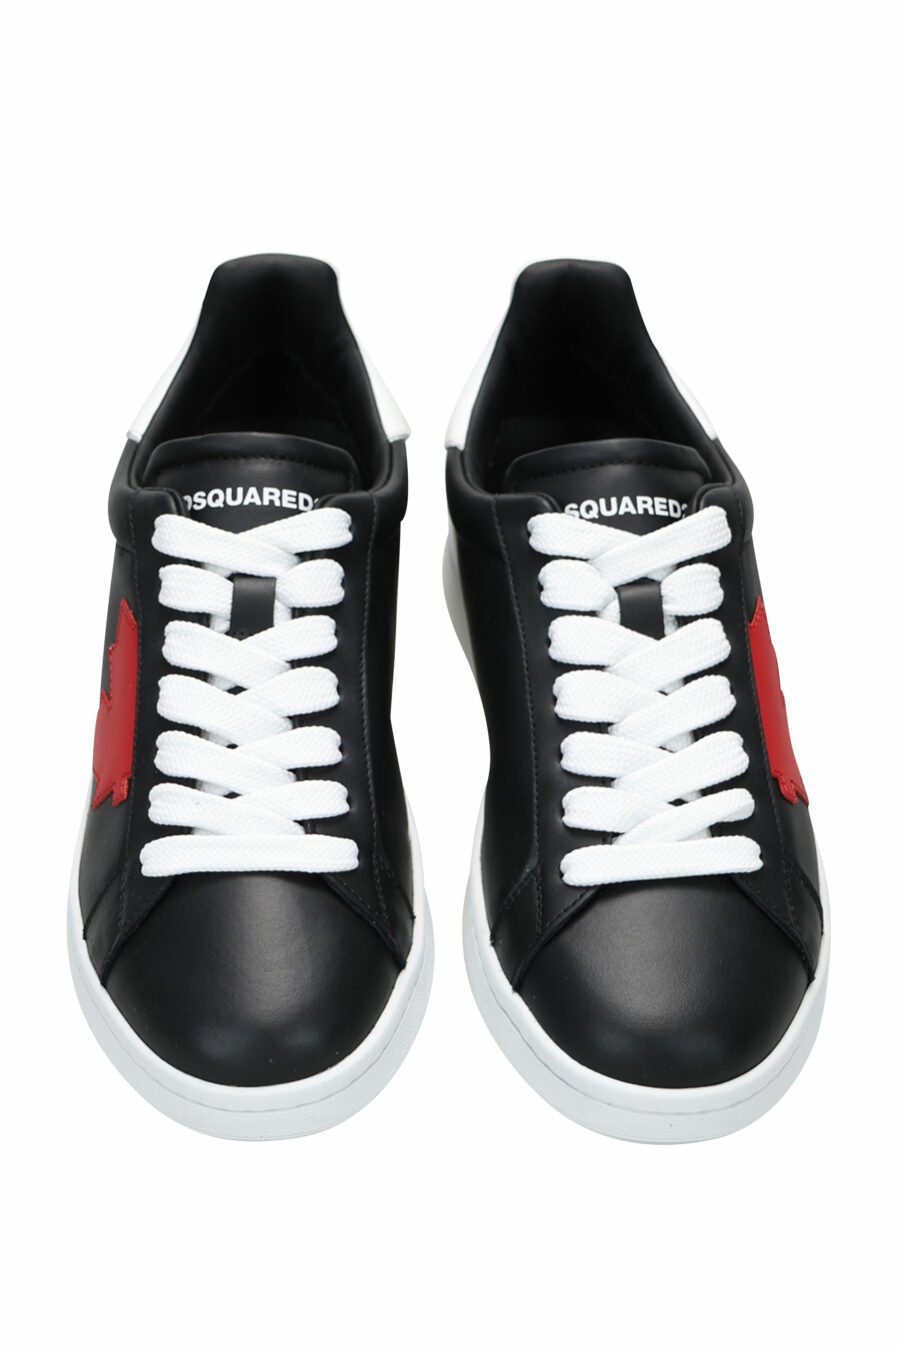 Black trainers with red leaf and white sole - 8055777240977 4